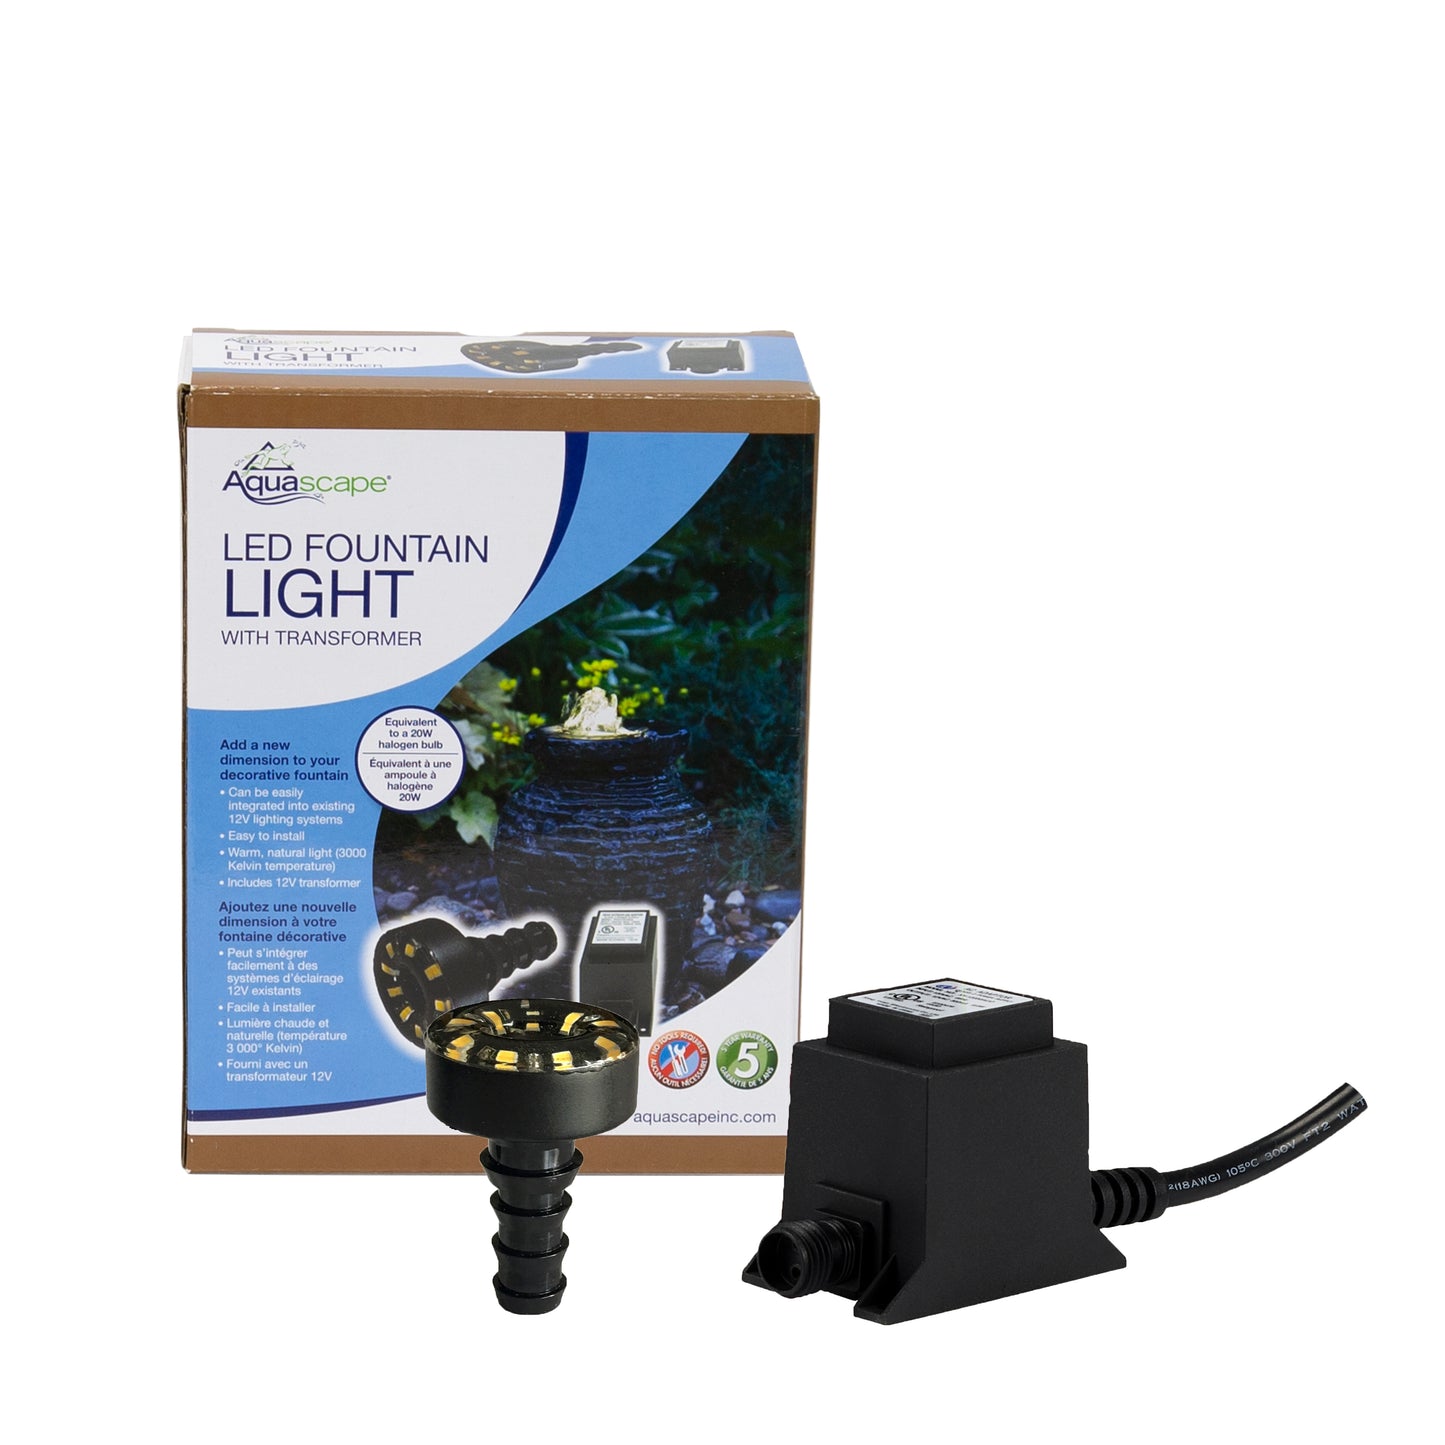 LED Fountain Light with Transformer